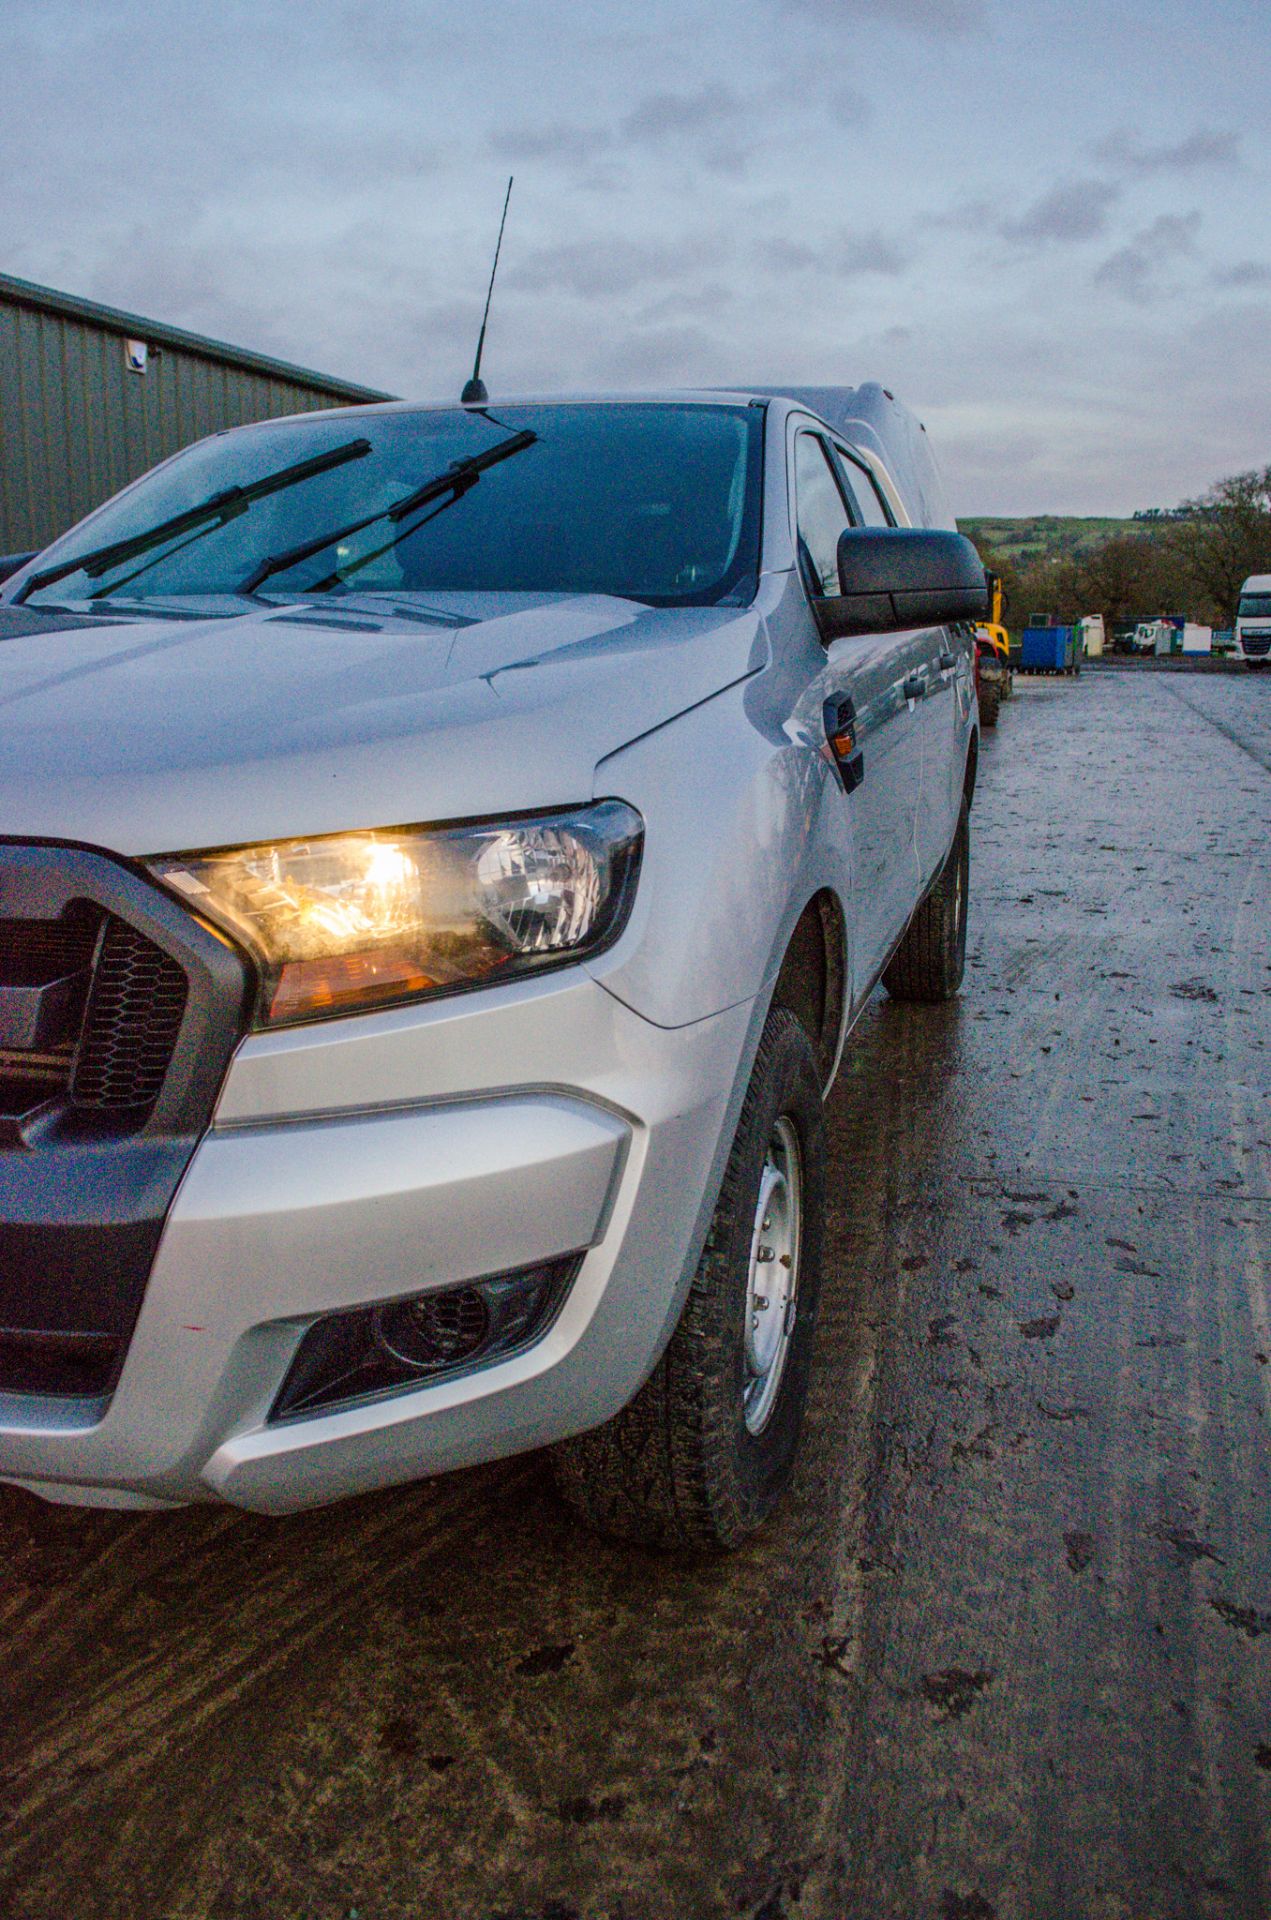 Ford Ranger 2.2 TDCi 160 XL manual 4x4 double cab pick up (Ex MOD) VIN: 6FPPXXMJ2PGS25449 Date of - Image 9 of 31